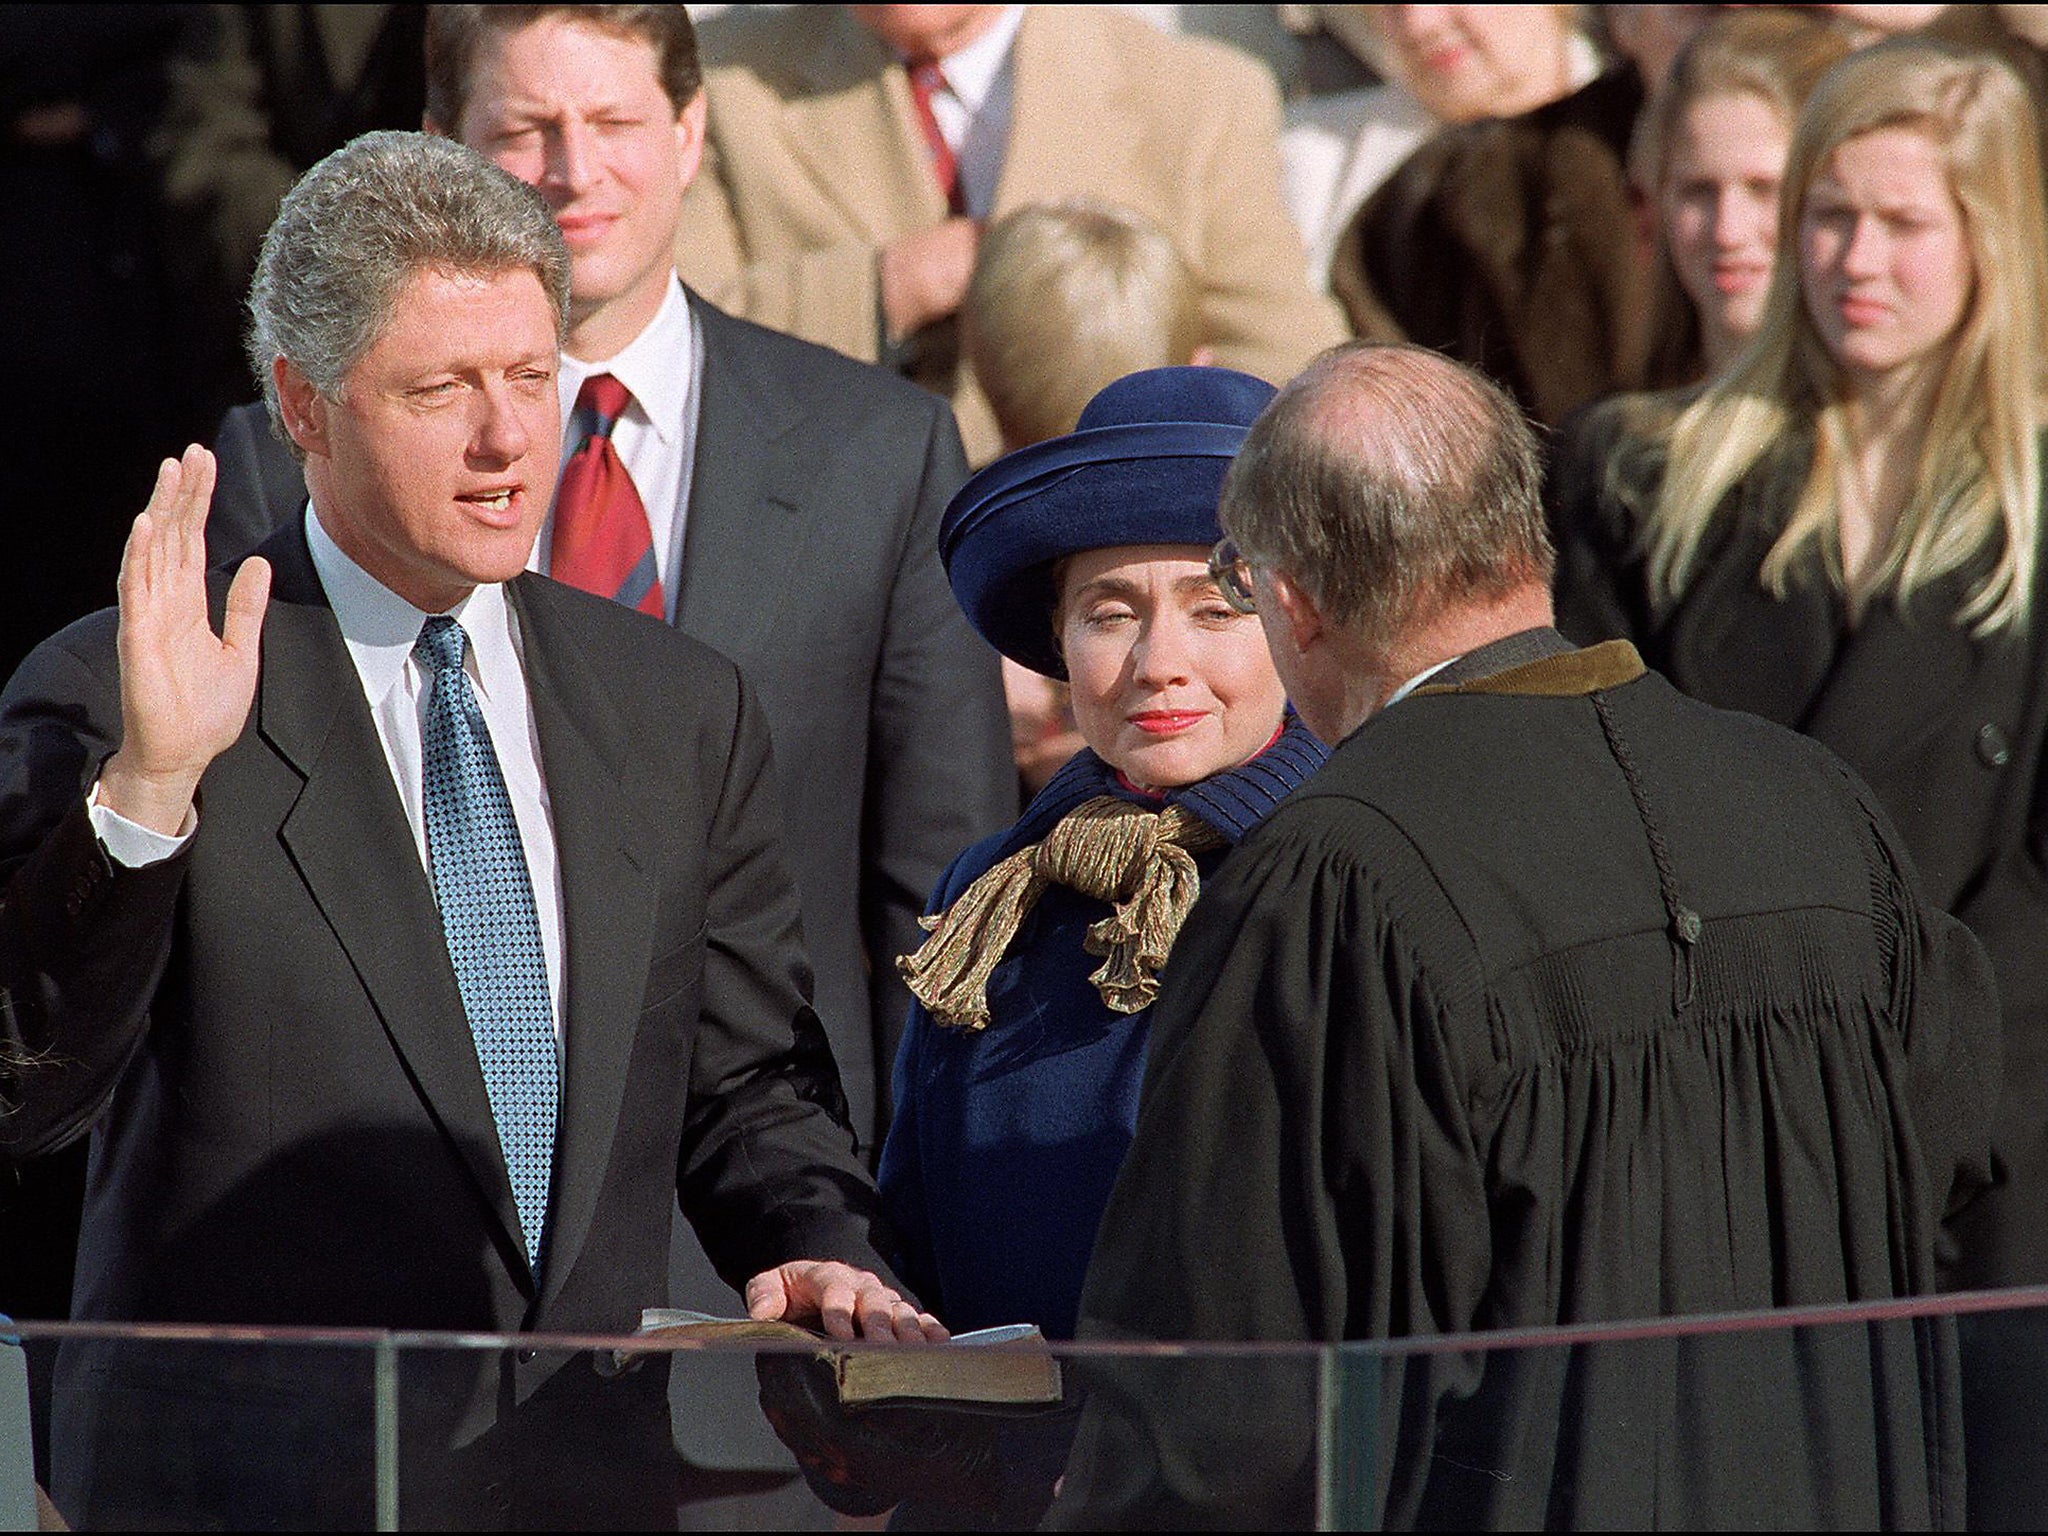 Bill Clinton’s speech in 1993 may have ‘inspired’ the words of other leaders more recently (Getty)